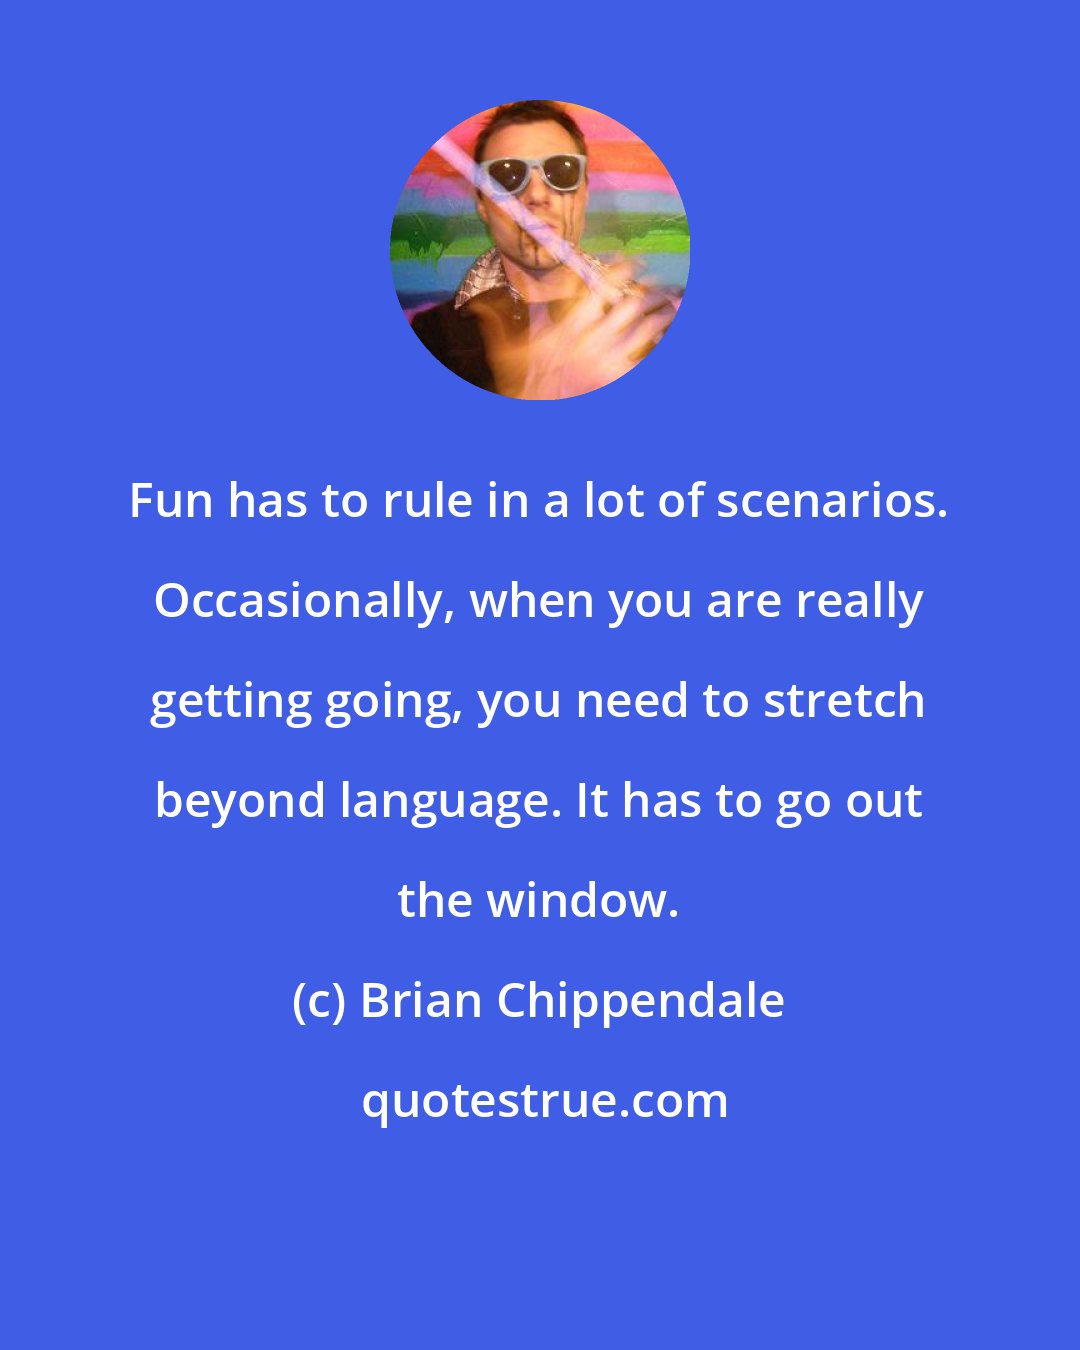 Brian Chippendale: Fun has to rule in a lot of scenarios. Occasionally, when you are really getting going, you need to stretch beyond language. It has to go out the window.